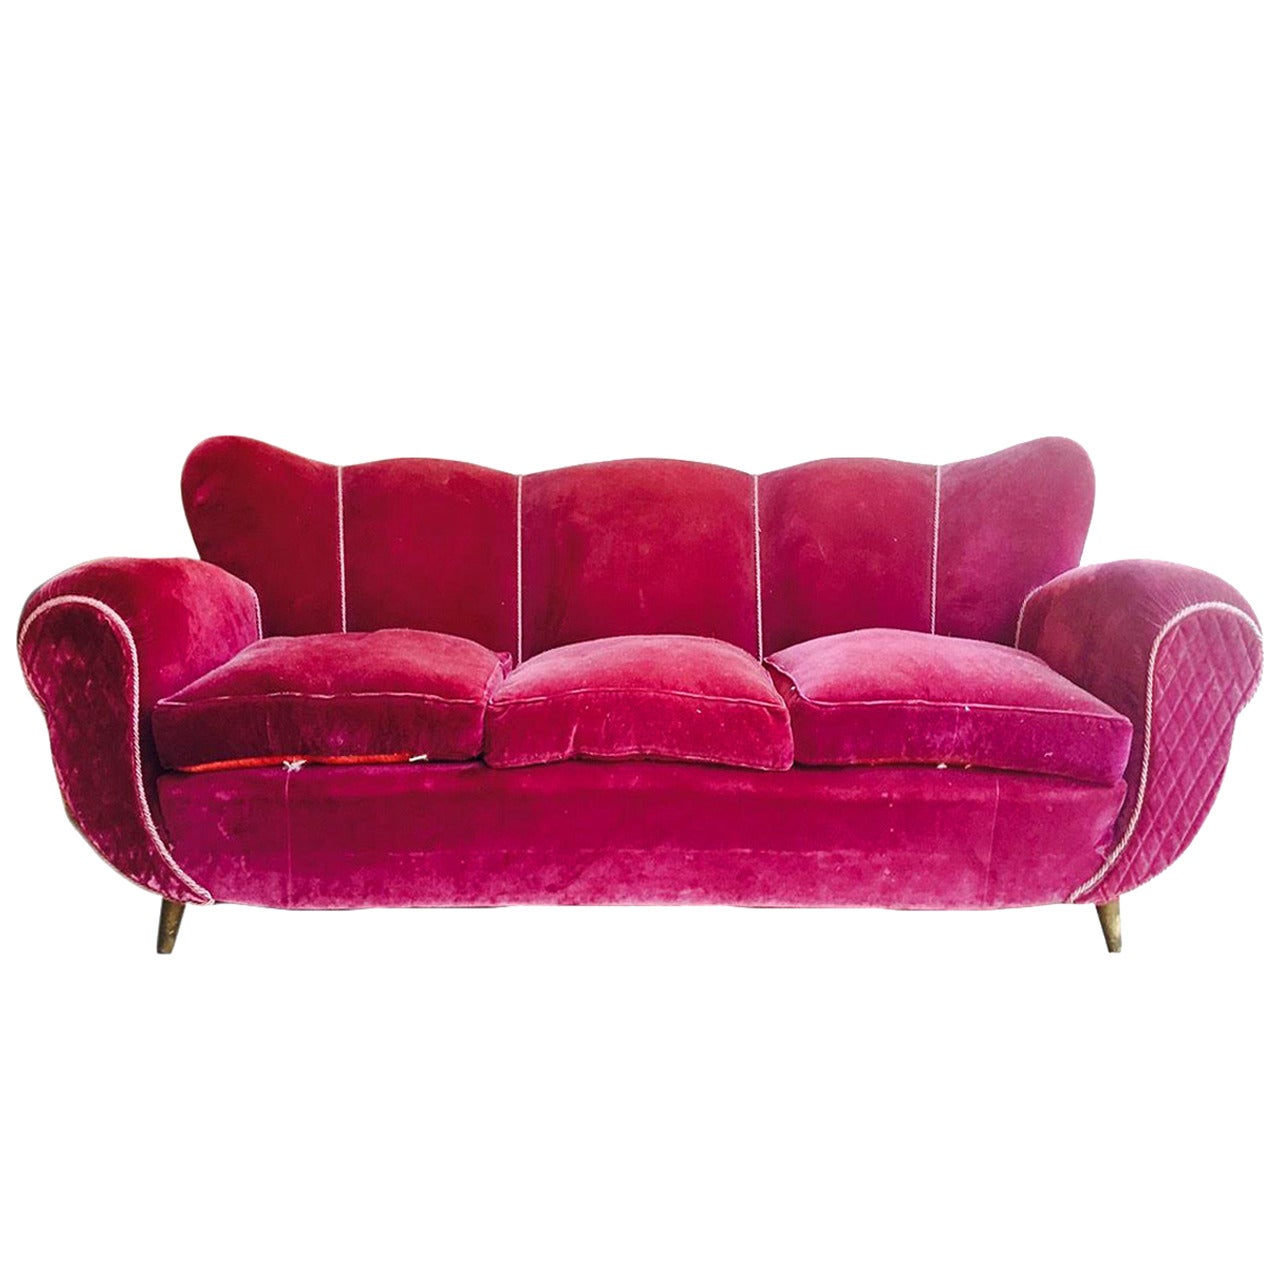 Large Sofa, Design Attributed to Guglielmo Ulrich, 1938 For Sale